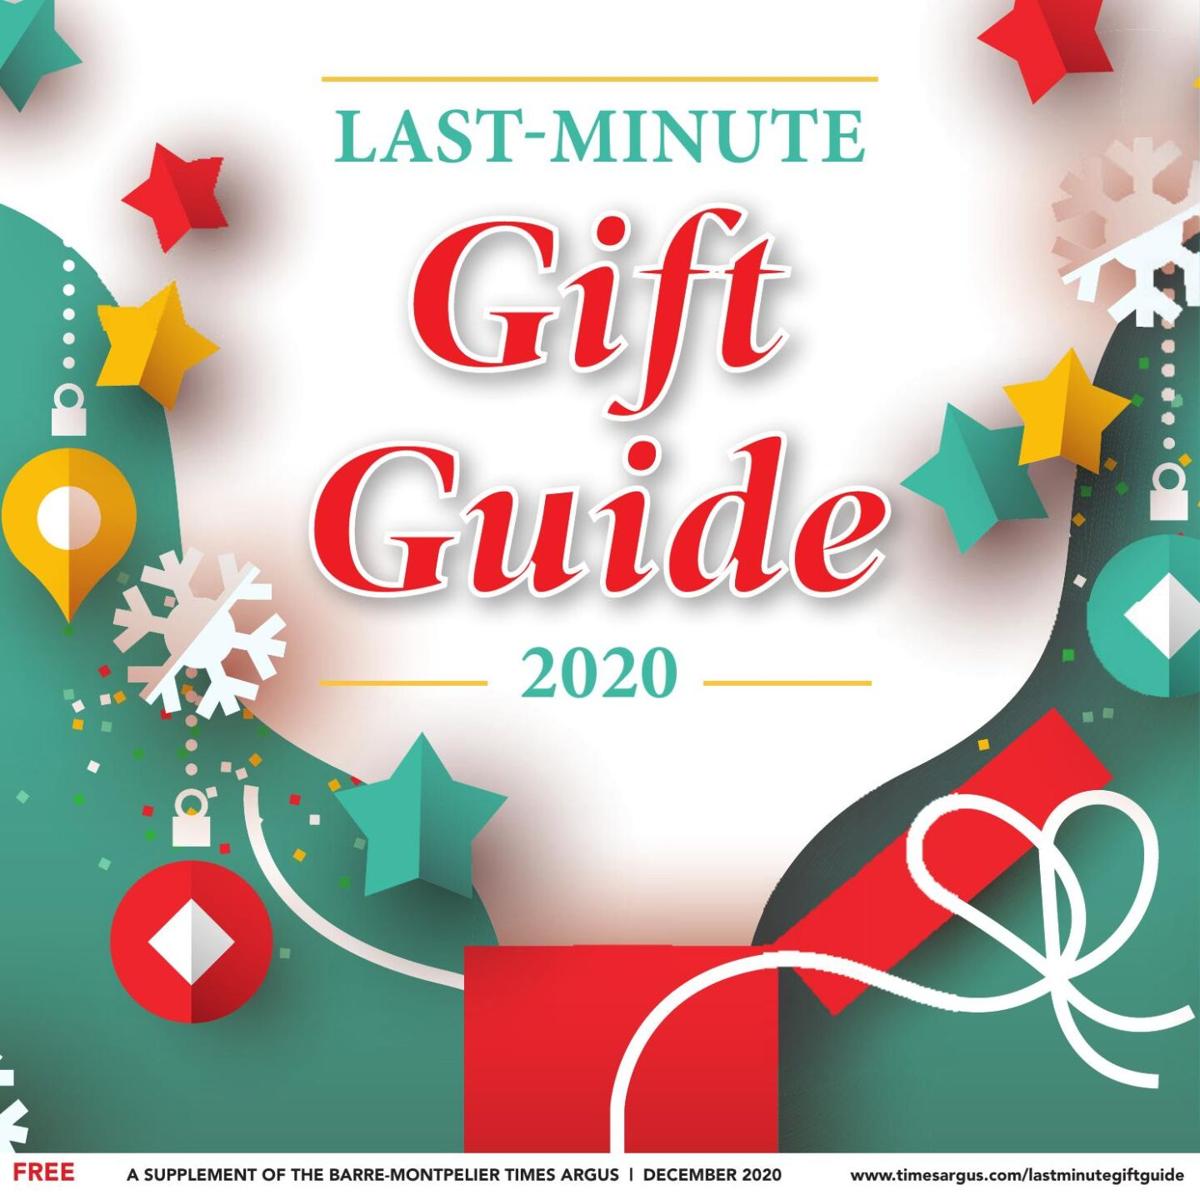 Last-Minute Gift Guide 2020